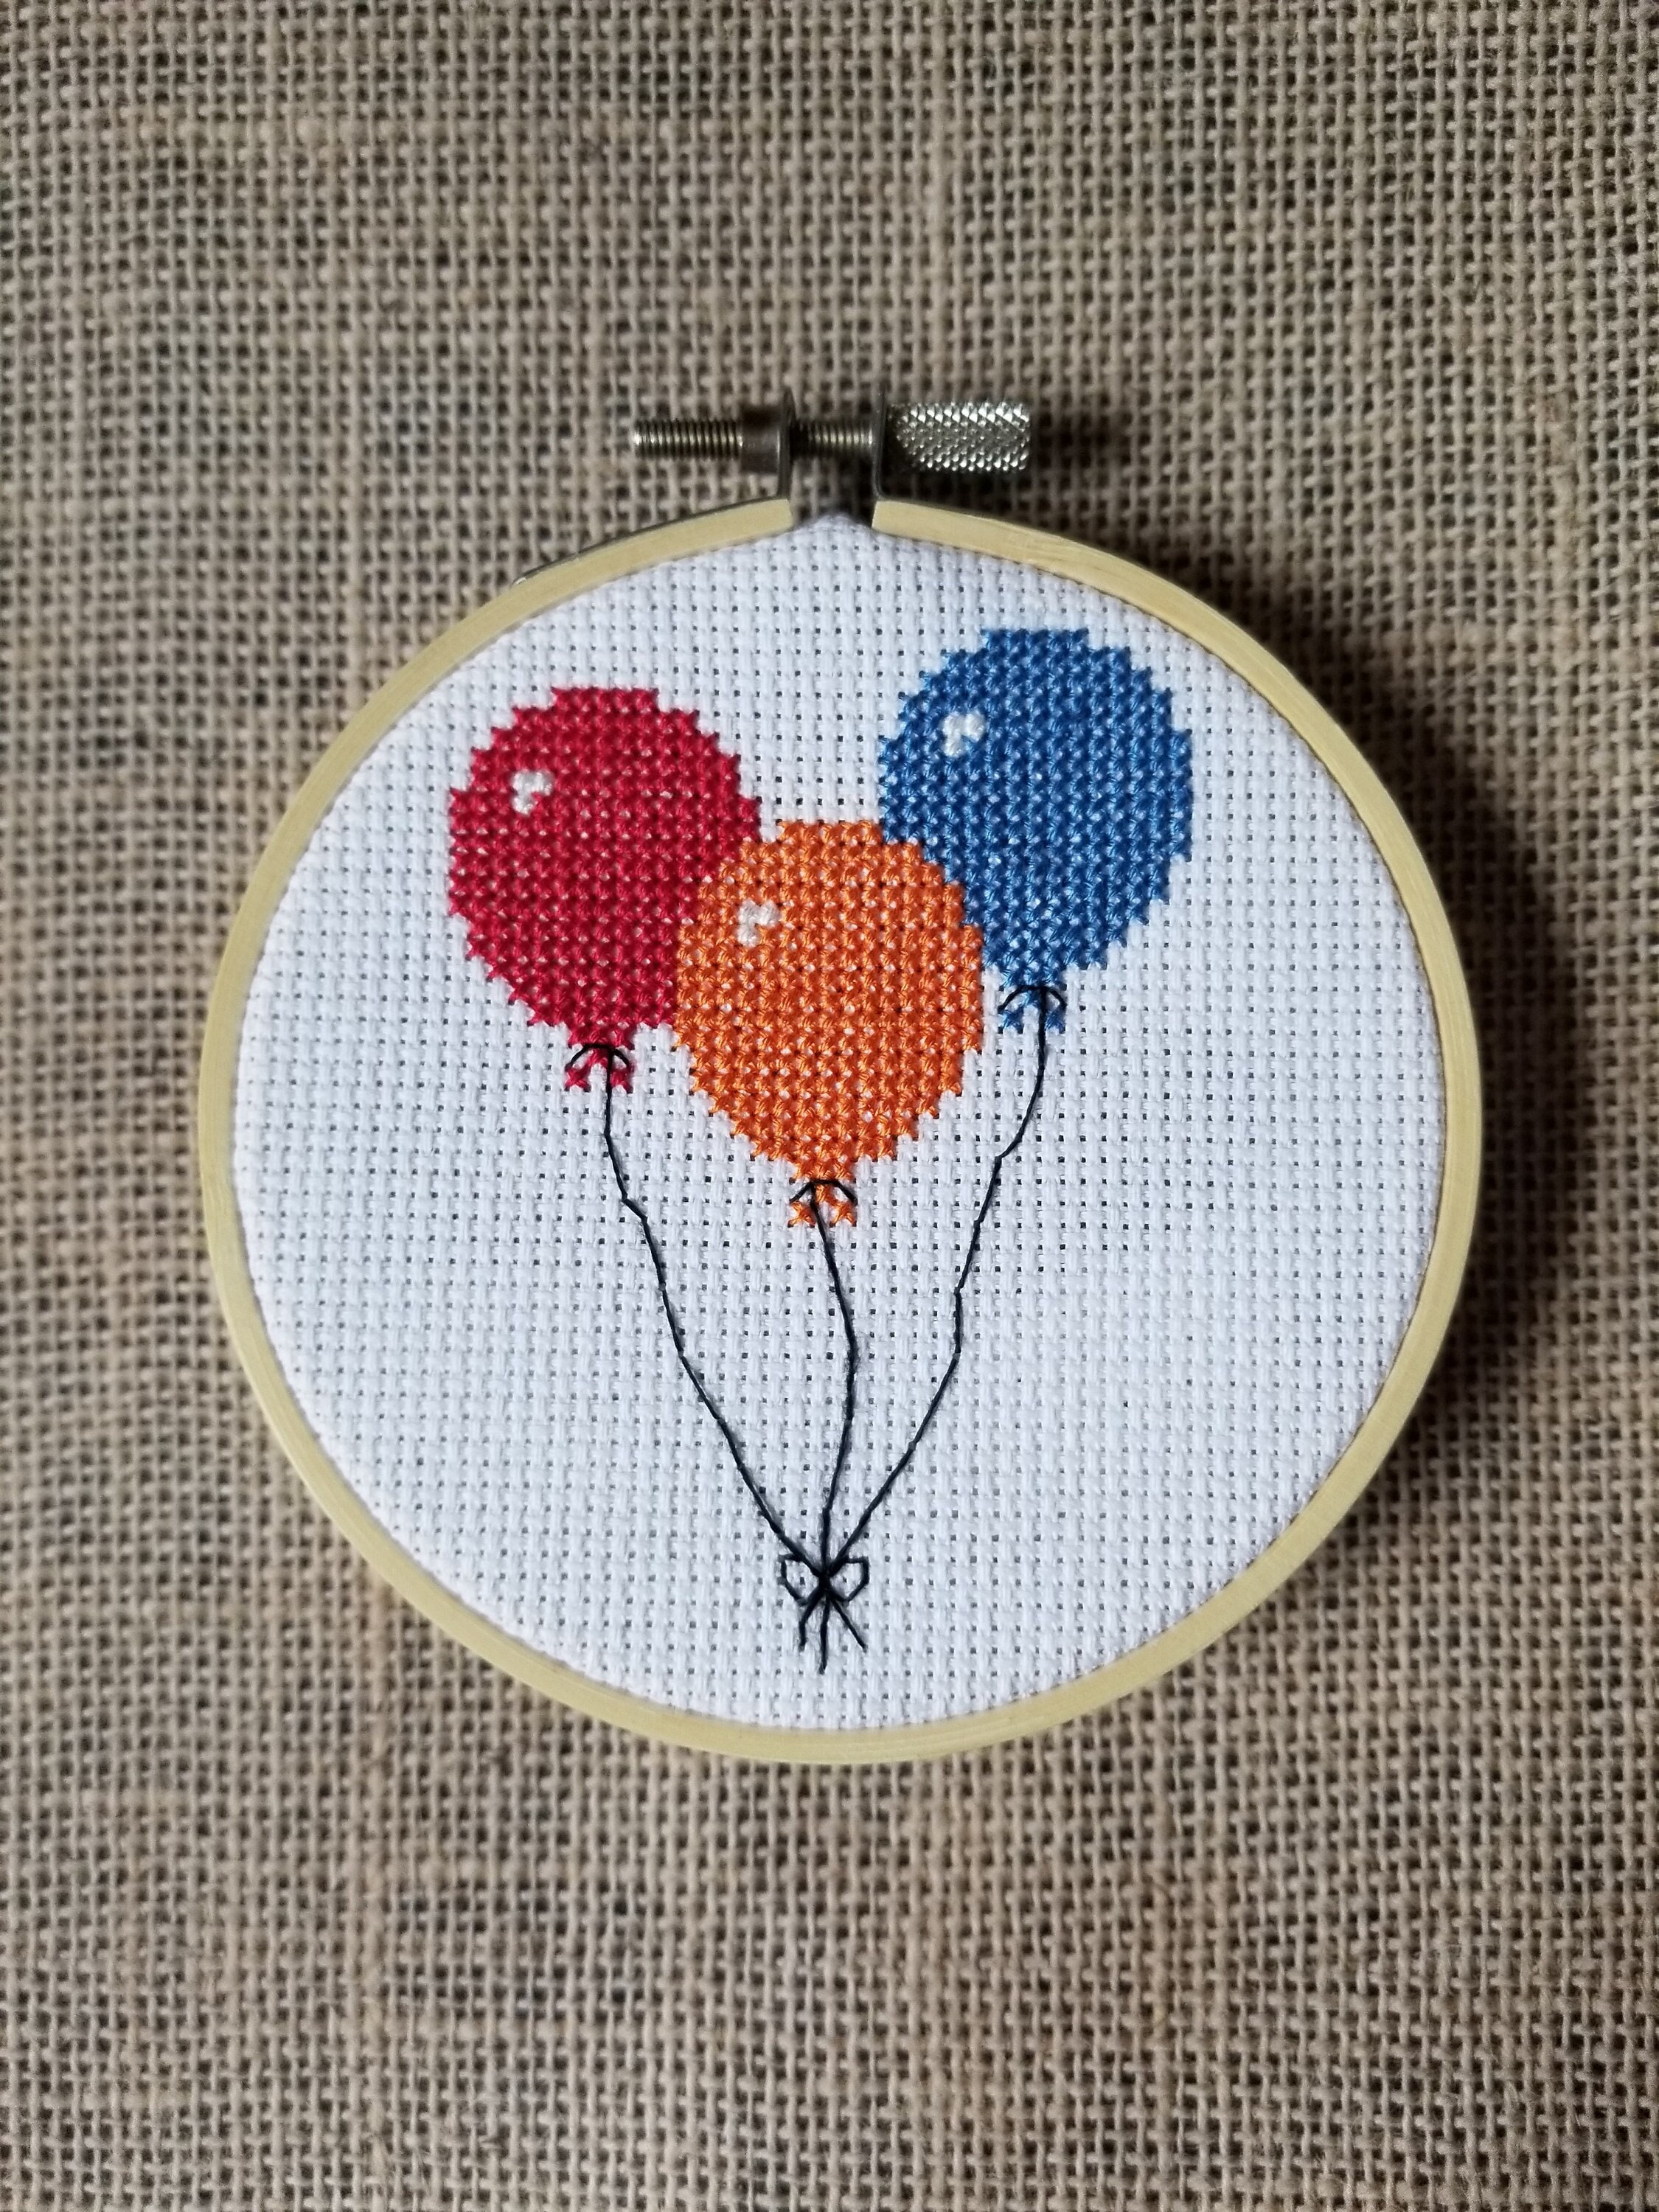 Counted Cross Stitch Balloons Pattern PDF Download 